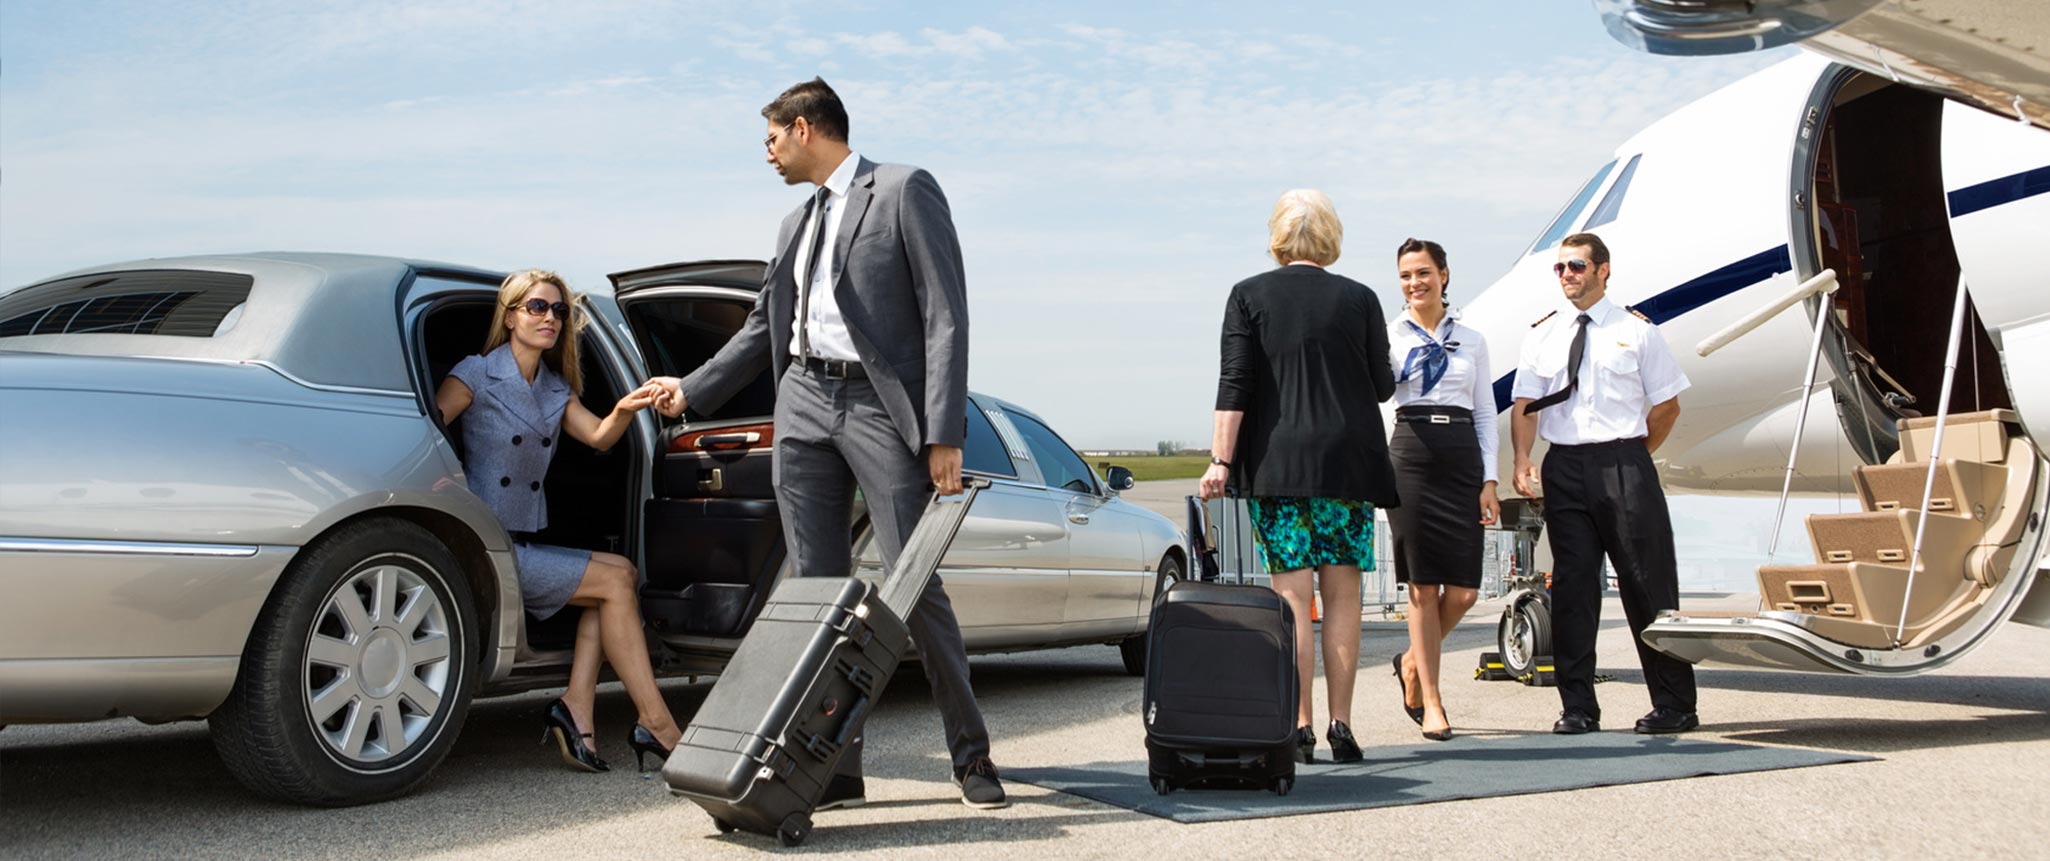 Air Charter Service for Travel Agents